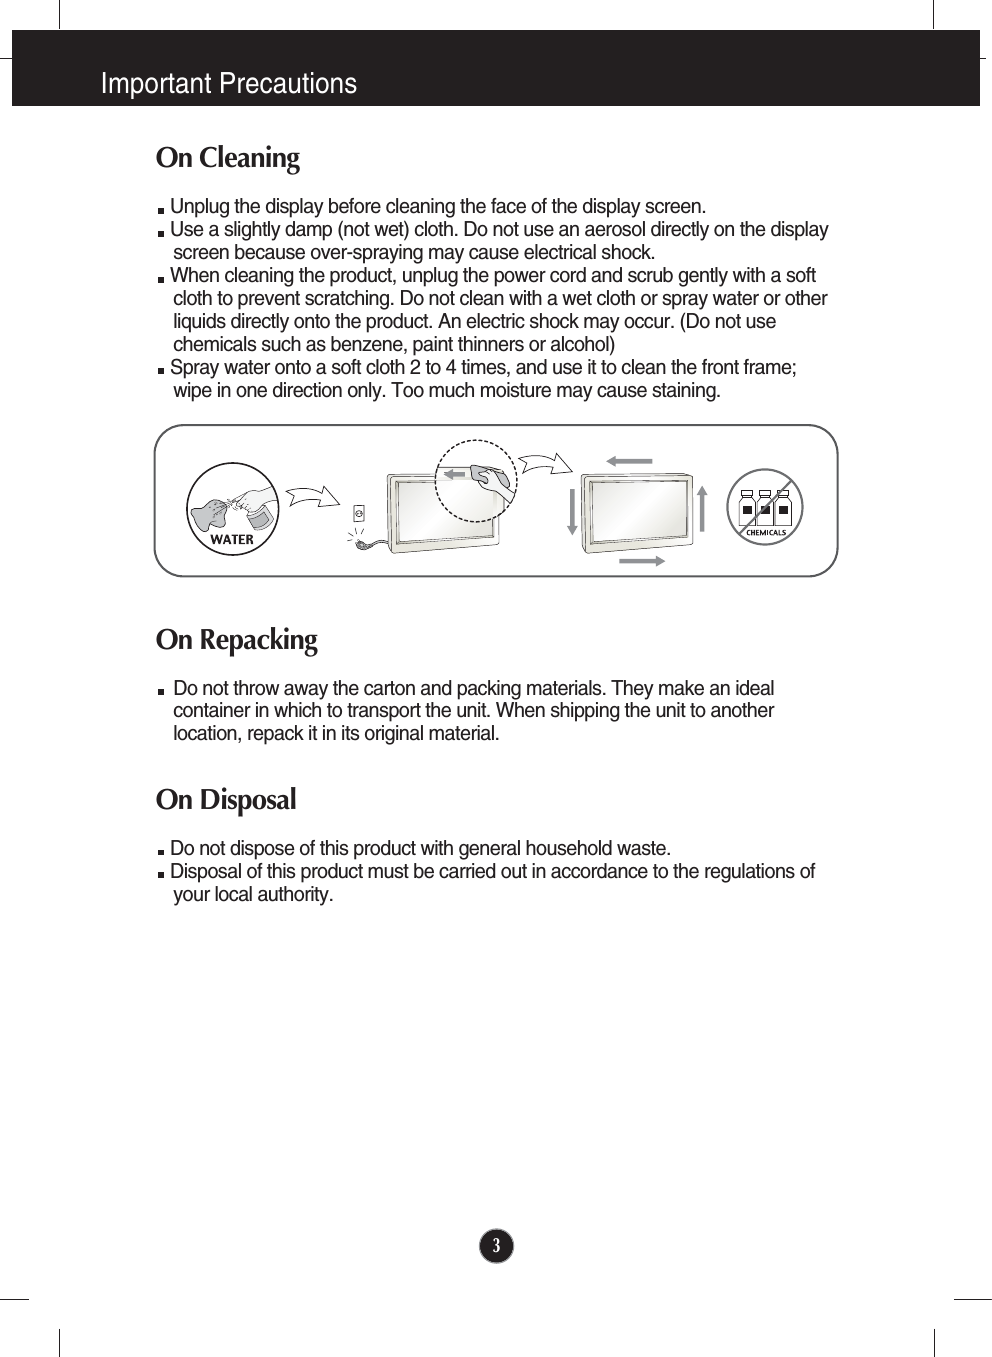 Important Precautions3On CleaningUnplug the display before cleaning the face of the display screen.Use a slightly damp (not wet) cloth. Do not use an aerosol directly on the displayscreen because over-spraying may cause electrical shock.When cleaning the product, unplug the power cord and scrub gently with a softcloth to prevent scratching. Do not clean with a wet cloth or spray water or otherliquids directly onto the product. An electric shock may occur. (Do not usechemicals such as benzene, paint thinners or alcohol) Spray water onto a soft cloth 2 to 4 times, and use it to clean the front frame;wipe in one direction only. Too much moisture may cause staining.  On RepackingDo not throw away the carton and packing materials. They make an idealcontainer in which to transport the unit. When shipping the unit to anotherlocation, repack it in its original material.On DisposalDo not dispose of this product with general household waste.Disposal of this product must be carried out in accordance to the regulations ofyour local authority.